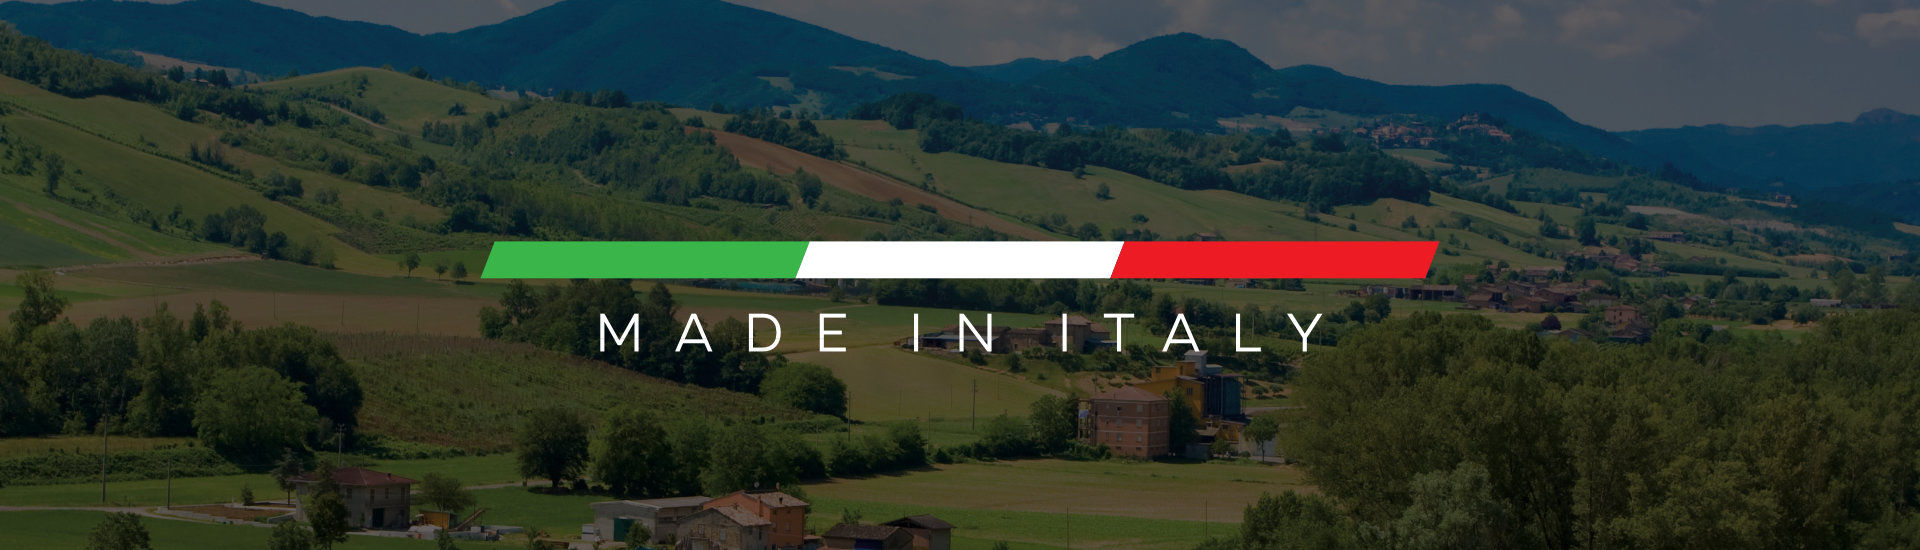 Italtherm - Made in Italy